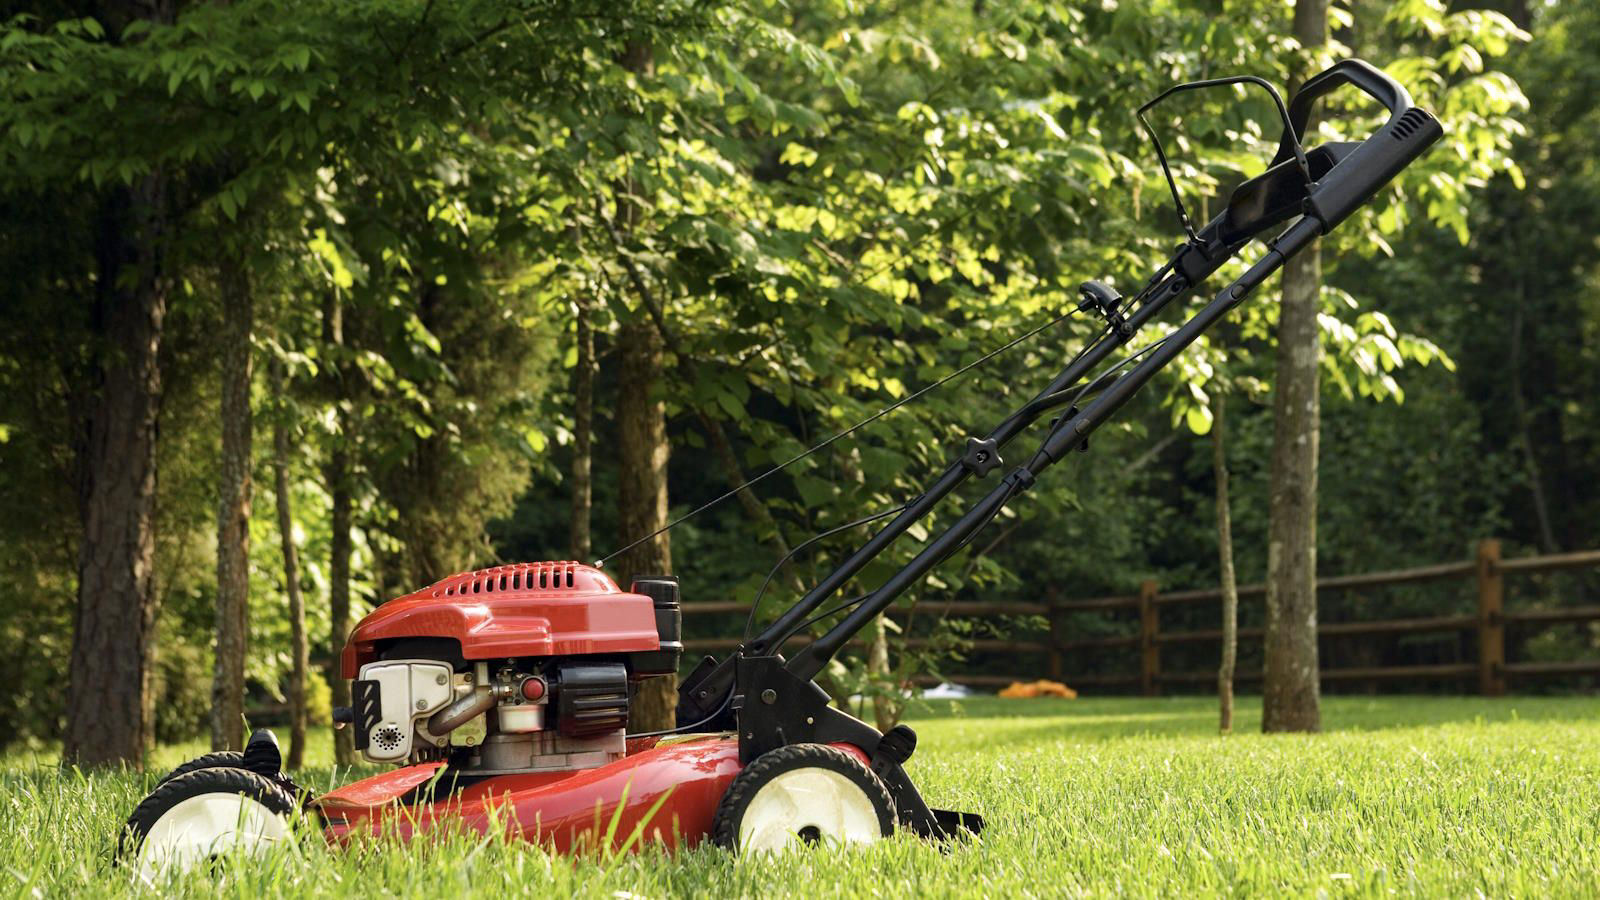 How to sharpen lawn mower blades − expert advice for safe sharpening ...